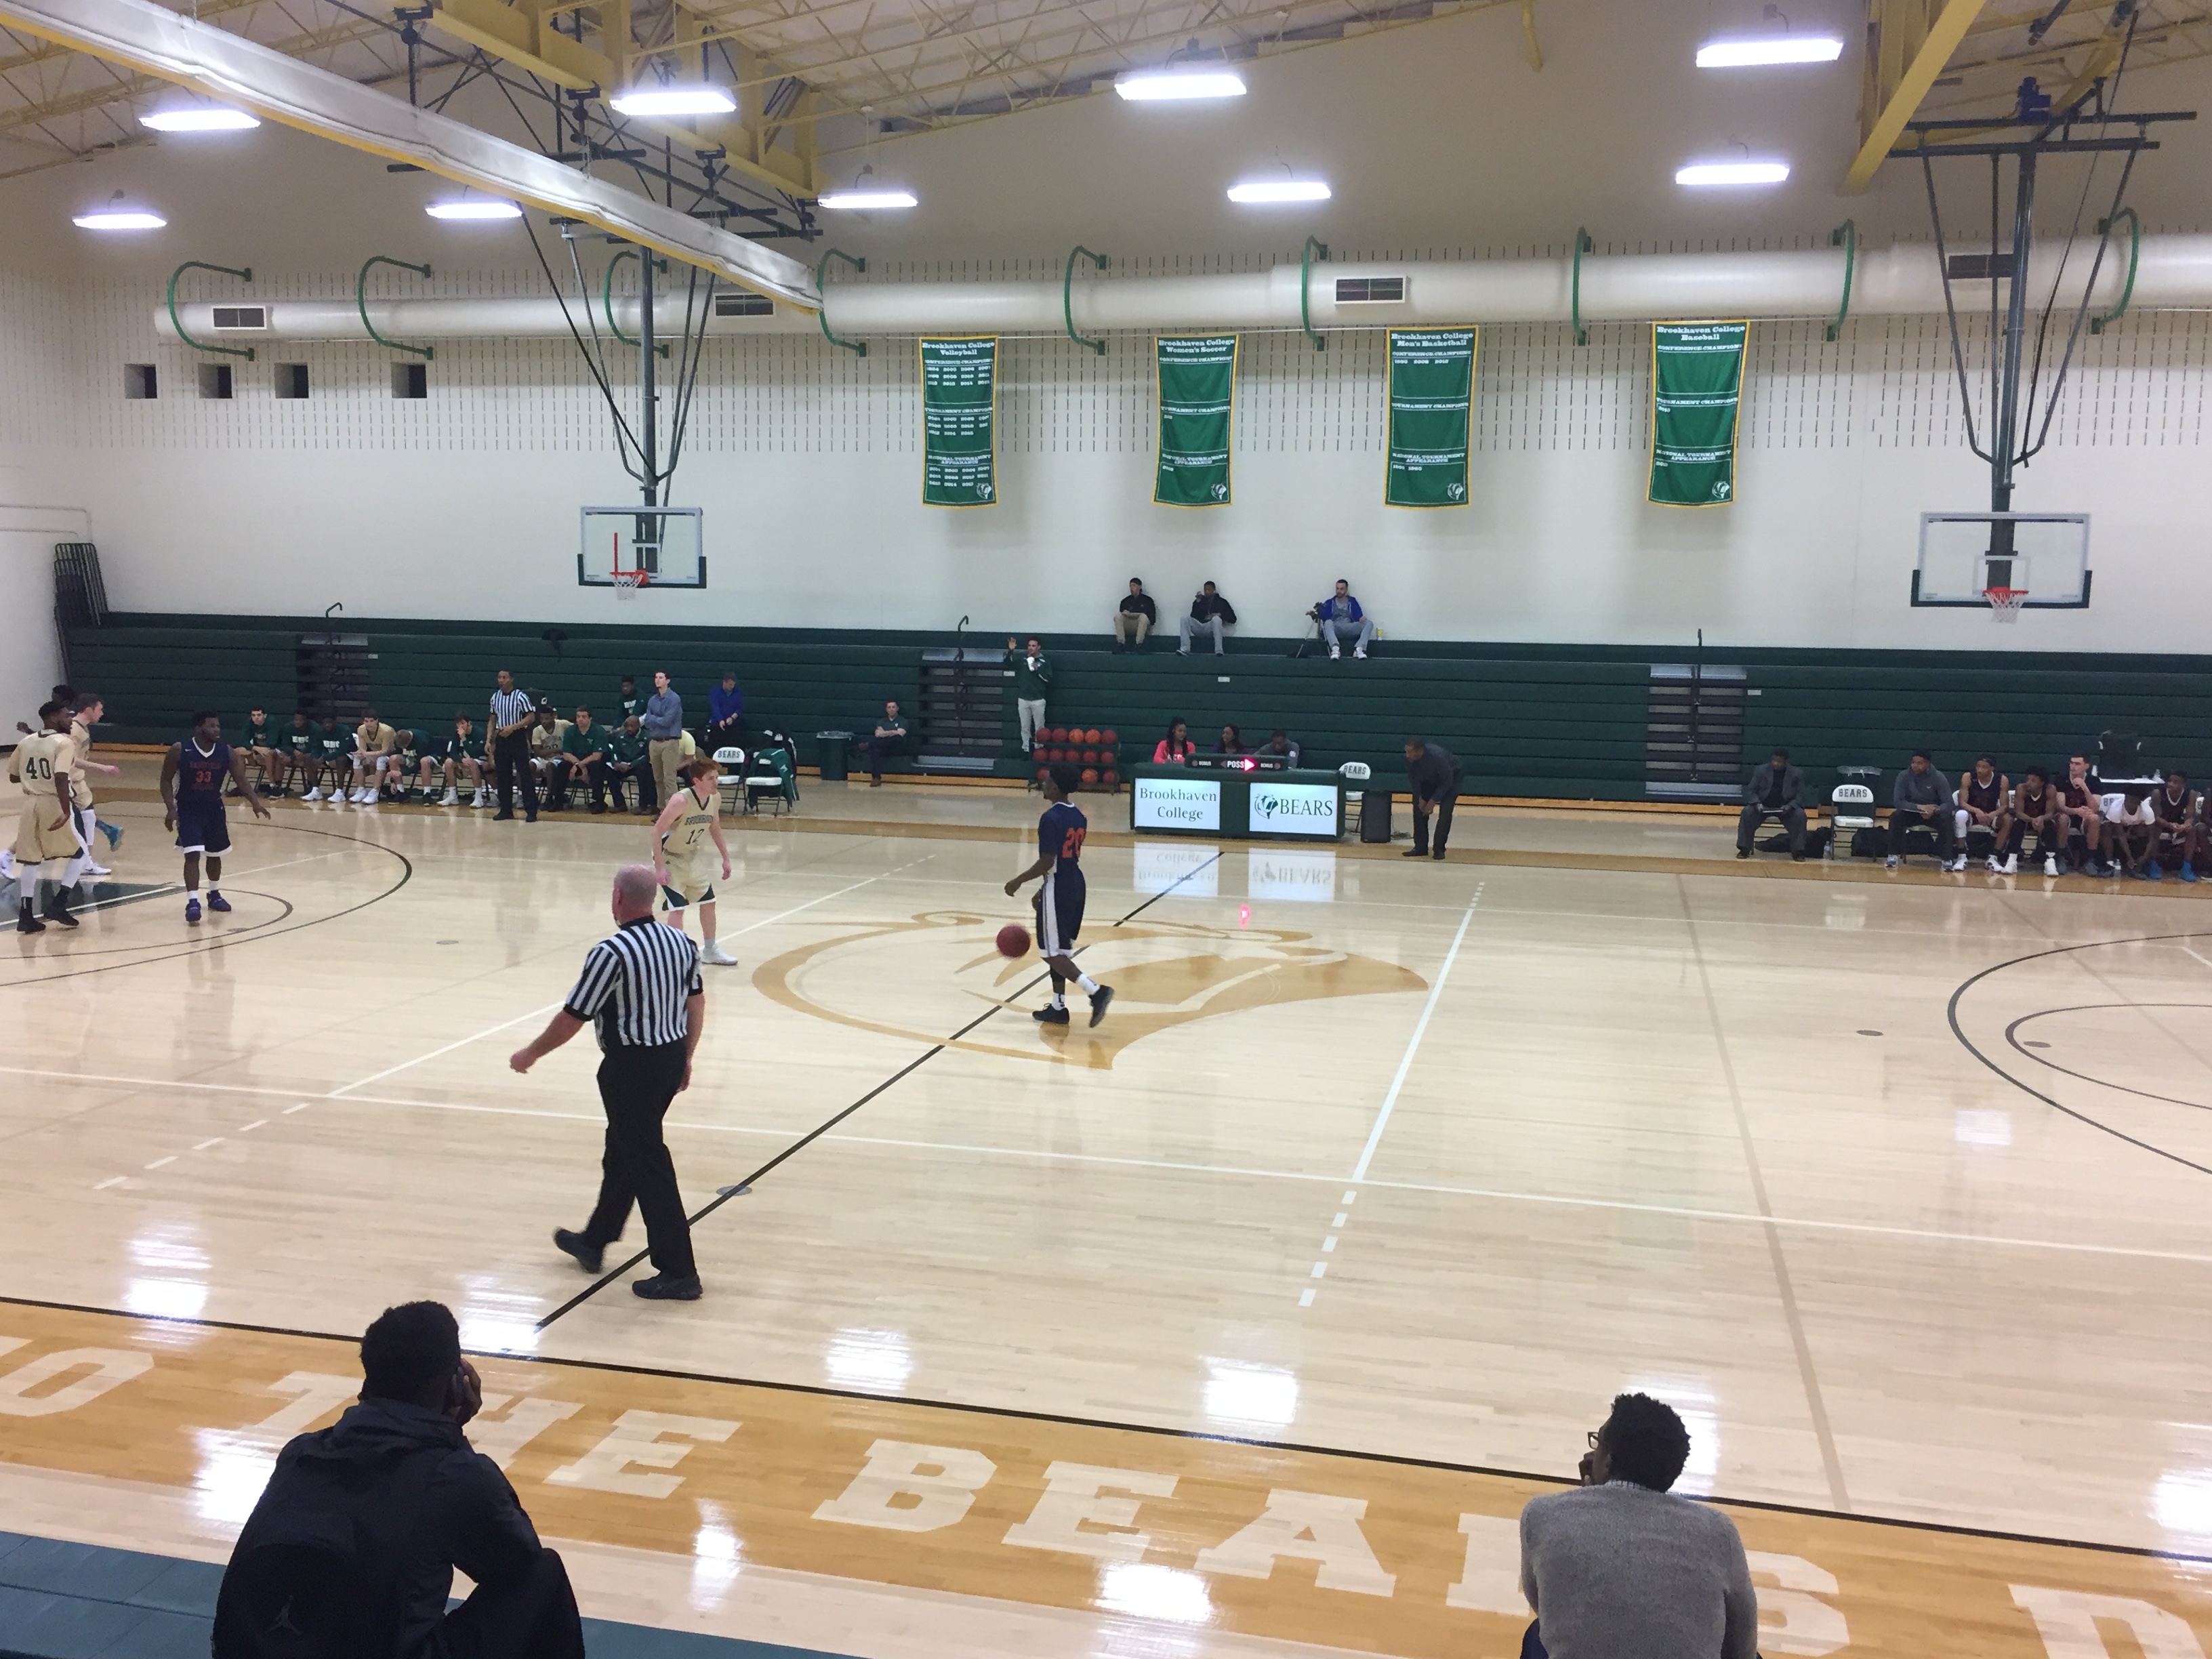 Brookhaven College Bears v Eastfield College Harvesters